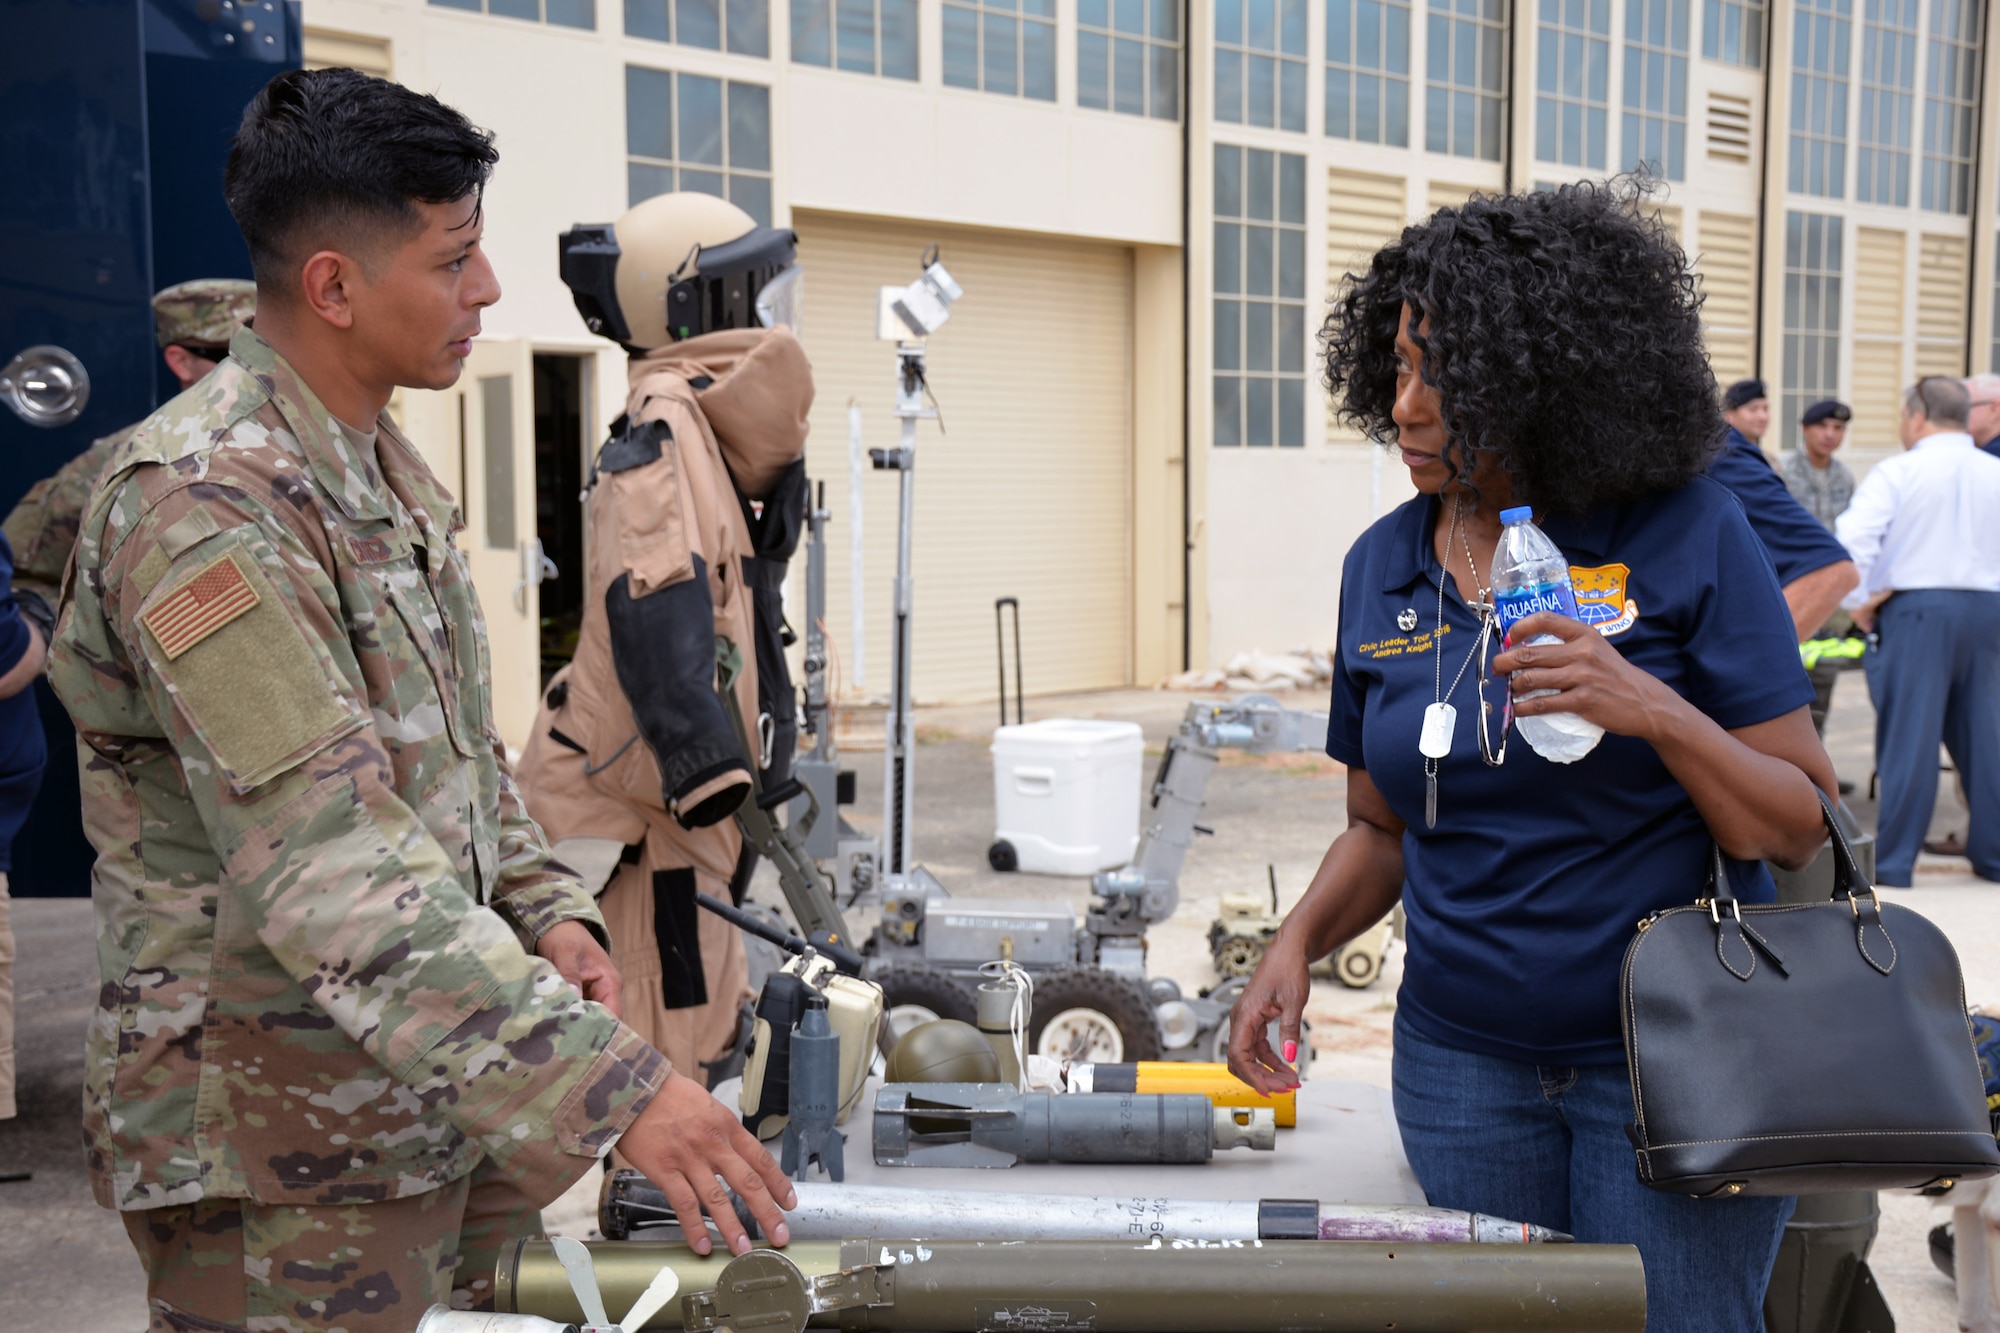 Staff Sgt. Oscar Chavez, 433rd Civil Engineer Squadron explosive ordnance specialist, talks with Honorary Commander Andrea Knight, Frost Bank assistant vice president, about weapons on display during a tour of the 433rd Mission Support Group at Joint Base San Antonio-Lackland, Texas Sept. 7, 2019.